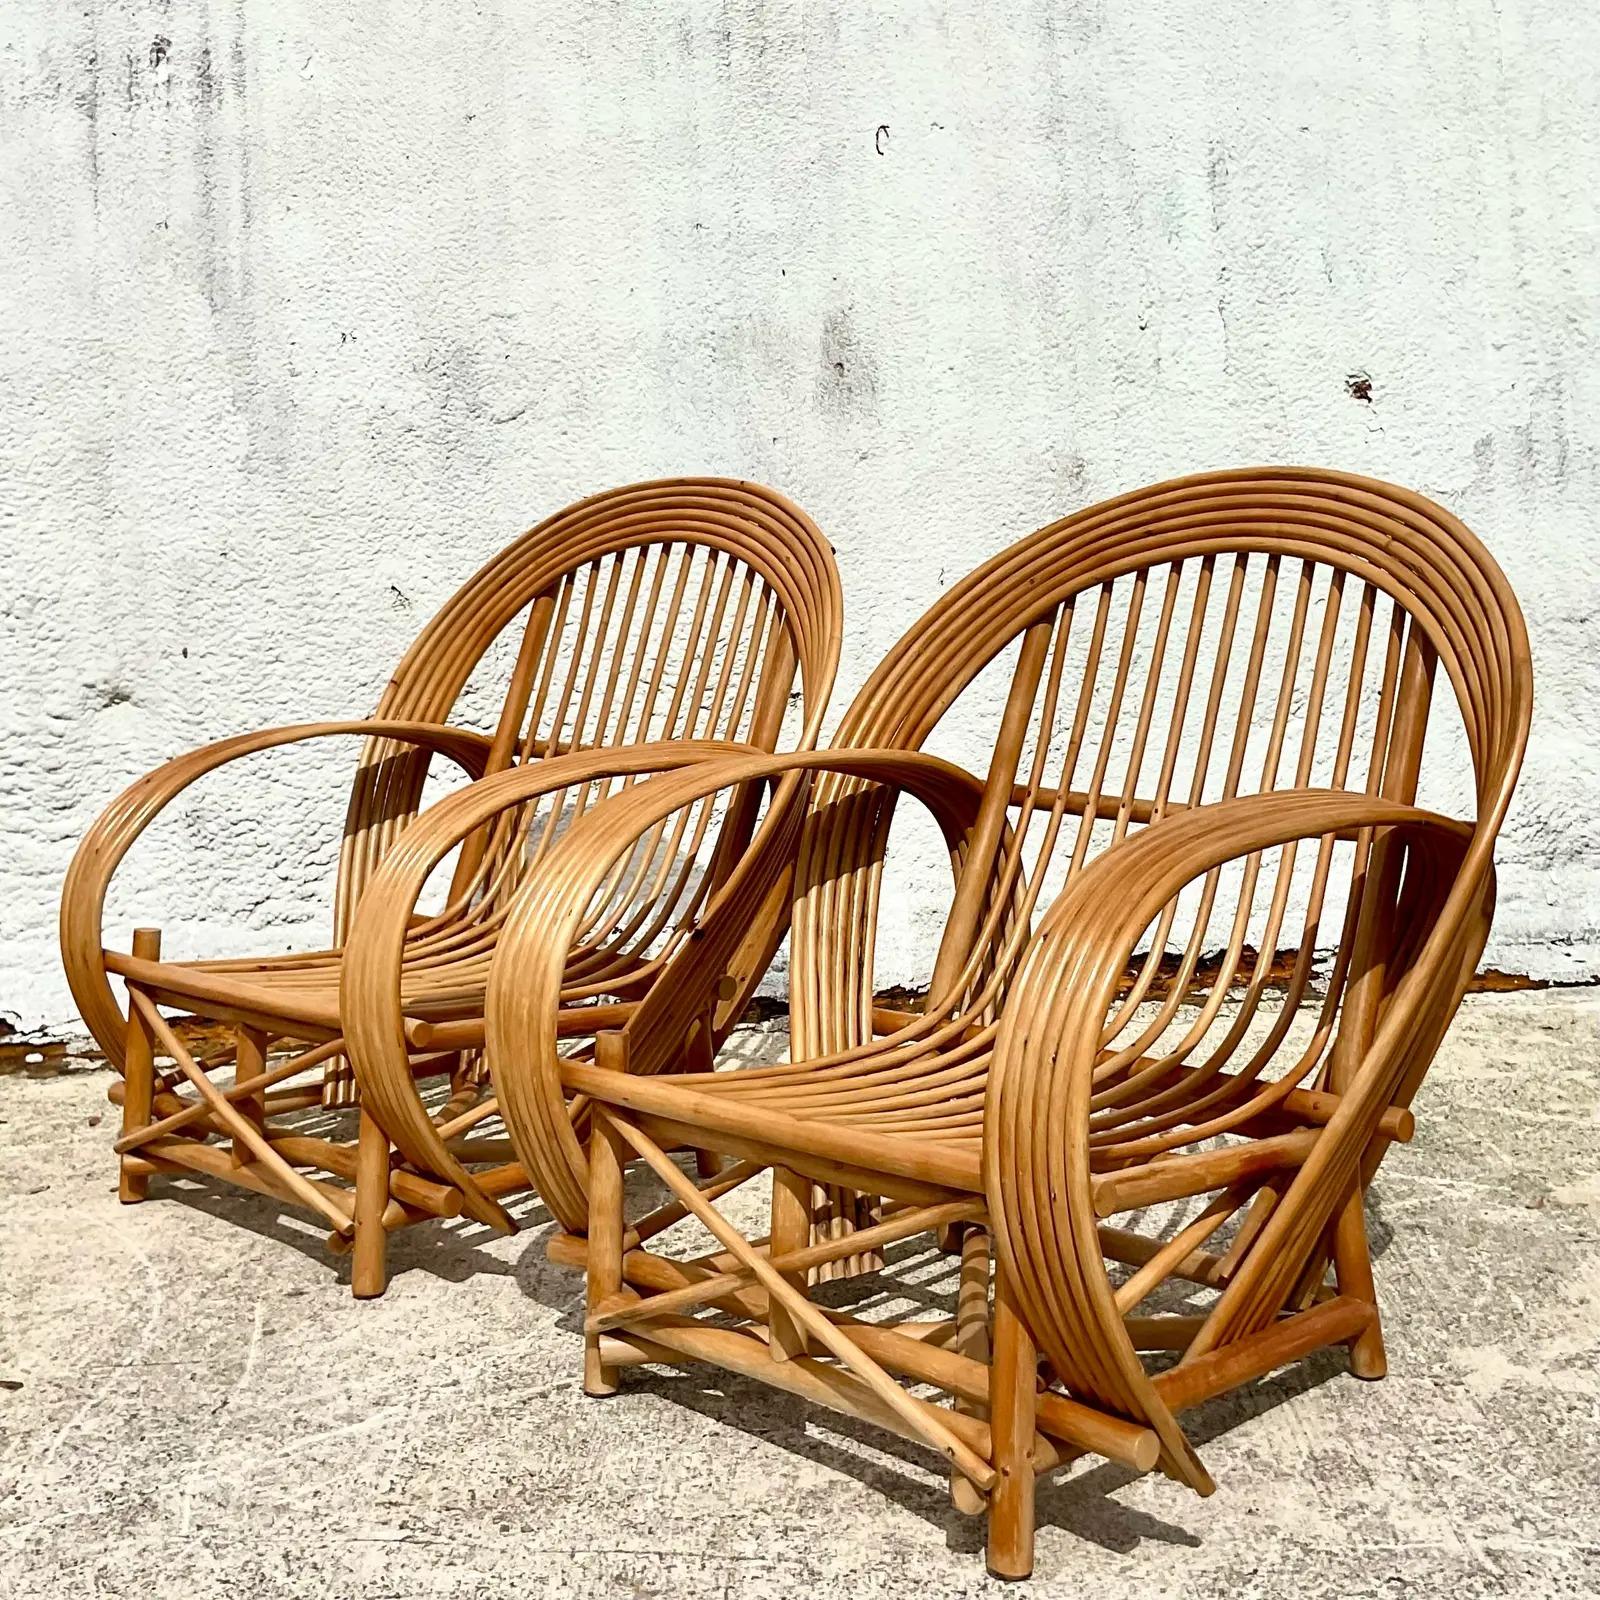 Fantastic pair of vintage Coastal lounge chairs. Beautiful bent rattan in a sexy high back shape. Perfect indoors or outside in a covered area. Acquired from a Palm Beach estate. 